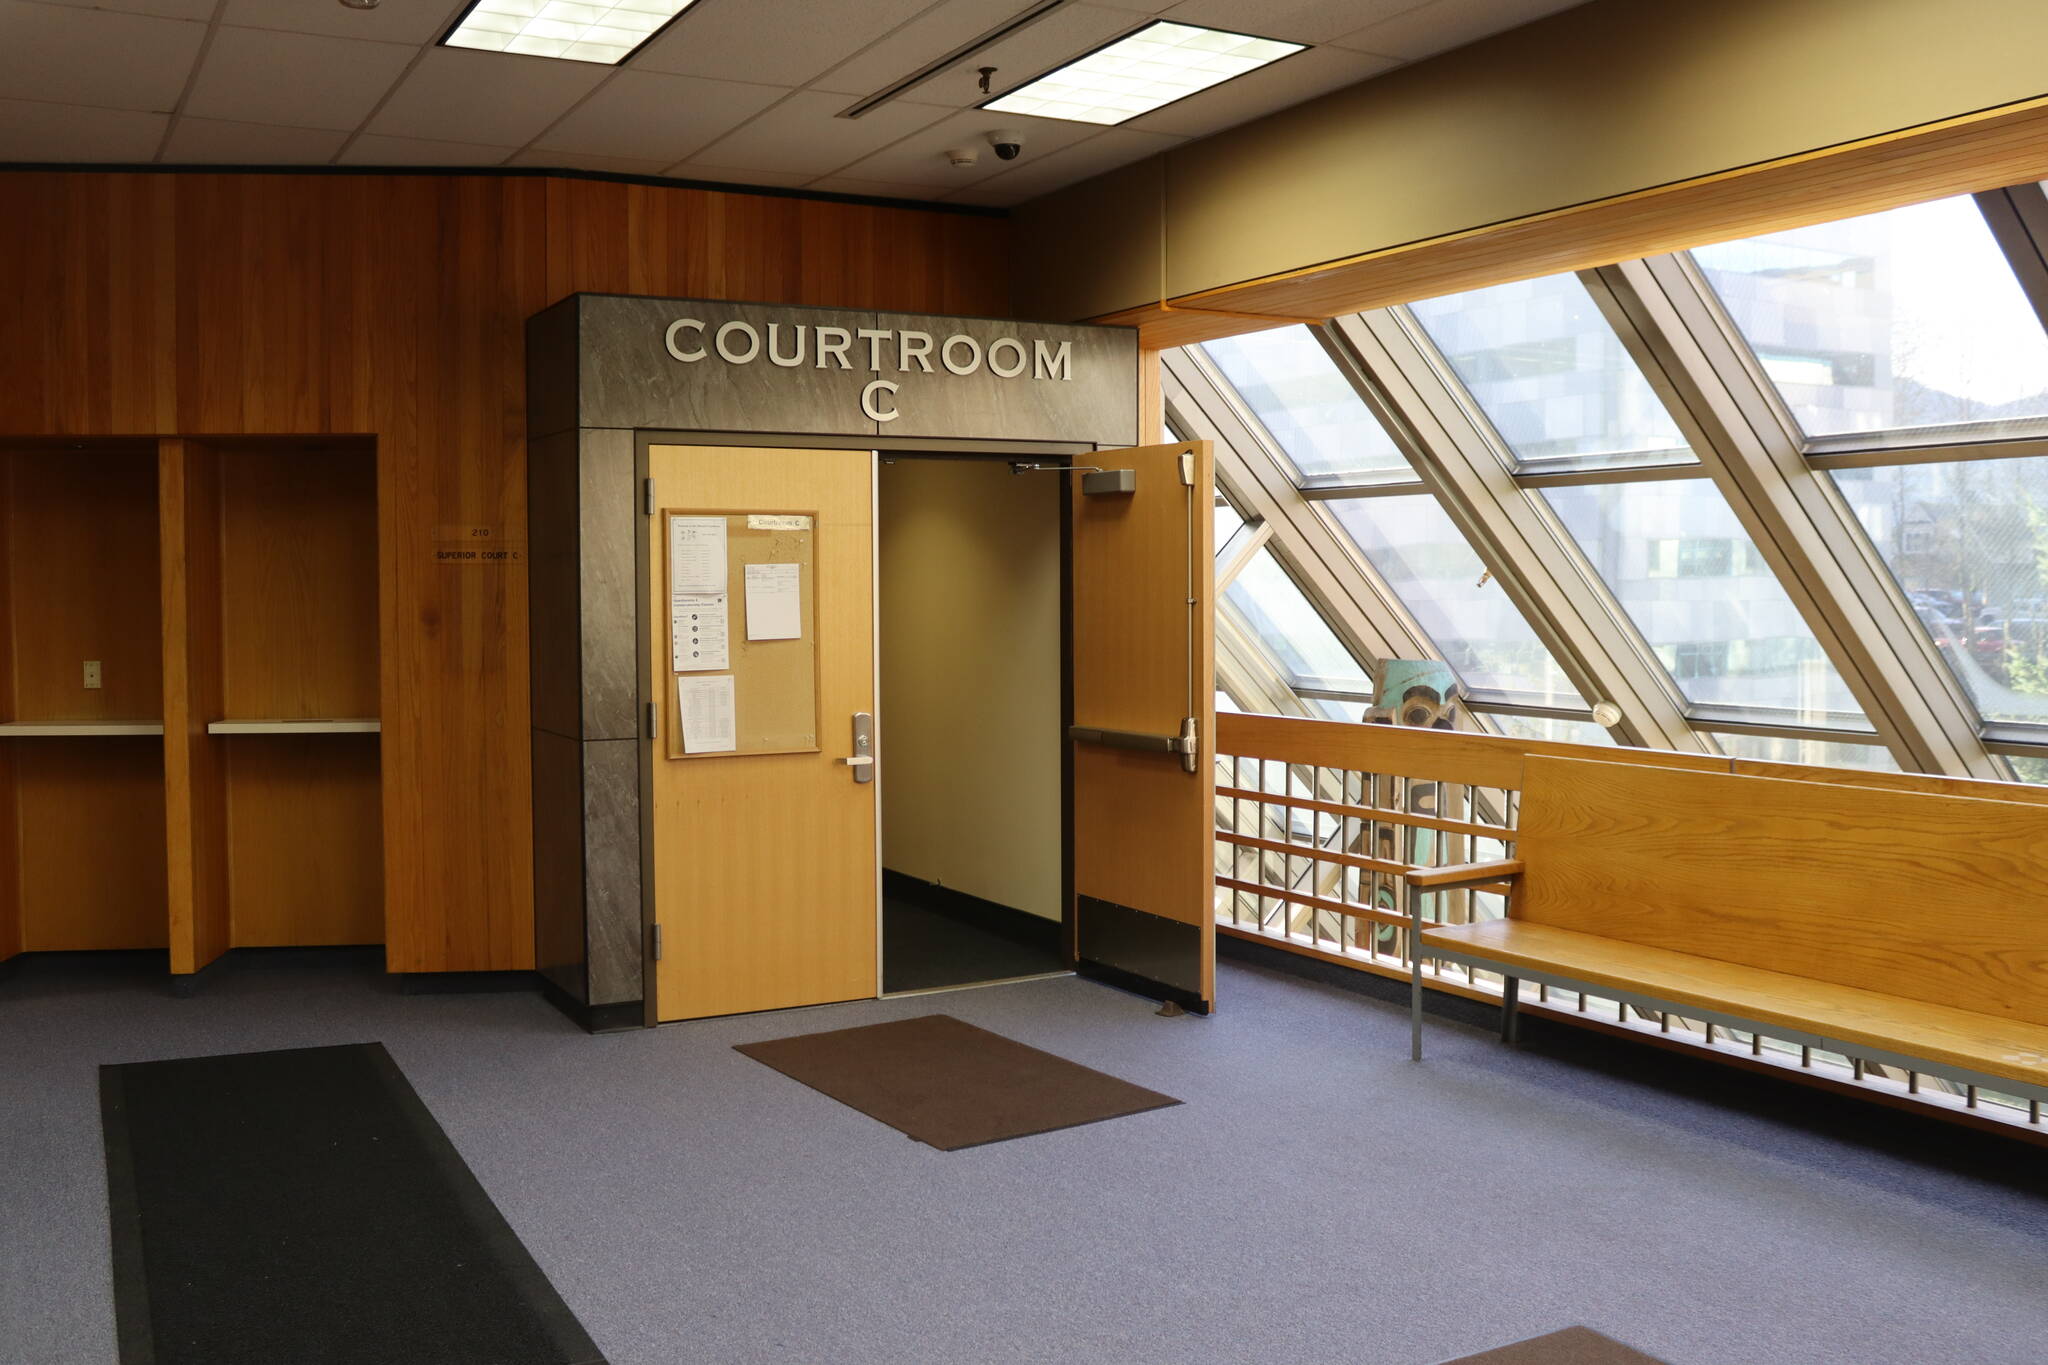 Juneau Courthouse Courtroom C on Thursday, the day the trial started for Sonya Taton, a Juneau woman accused of fatally stabbing a man in 2019 and the non-fatal stabbing of another man in 2016. (Meredith Jordan/ Juneau Empire)